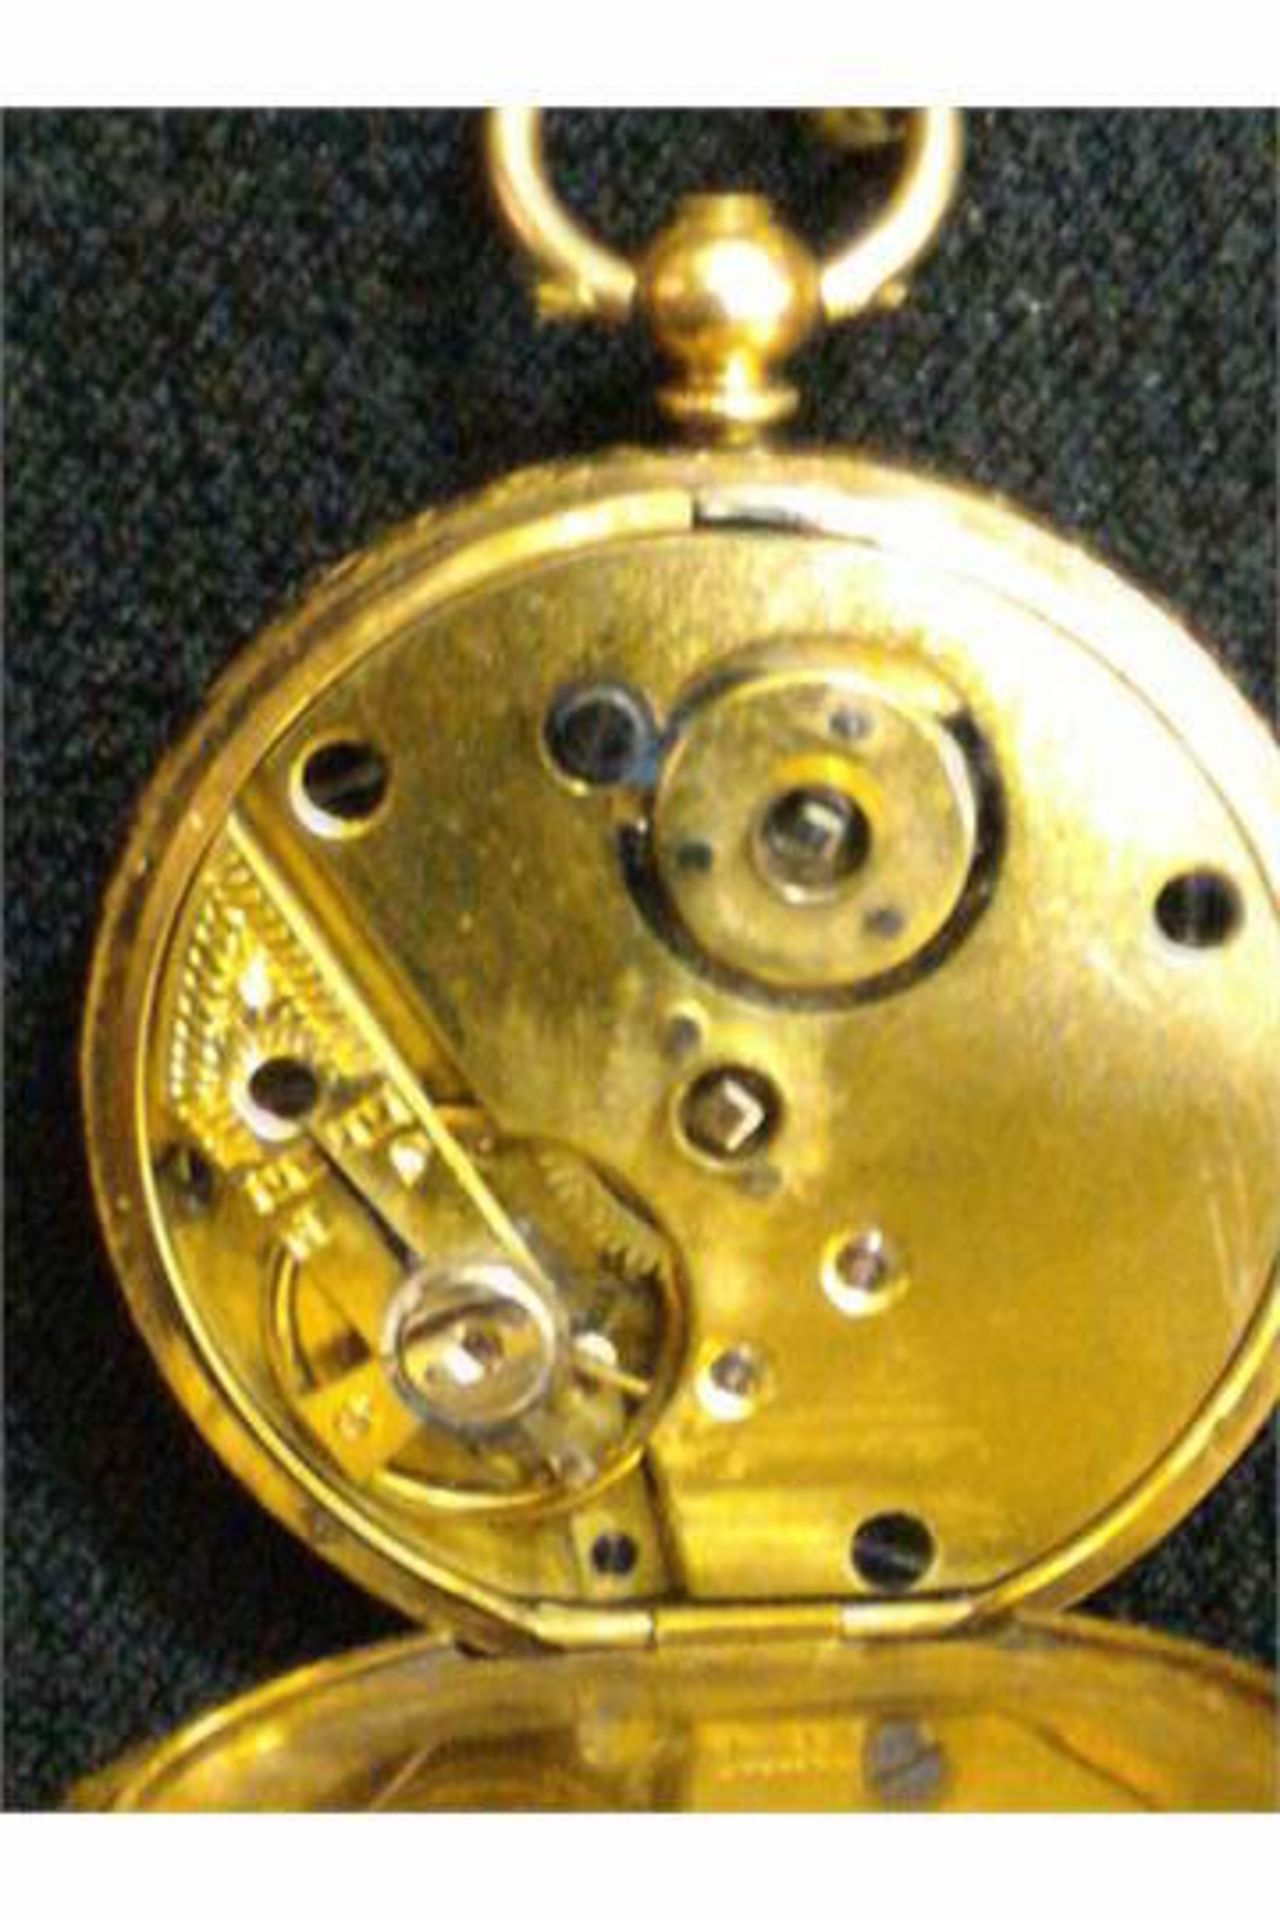 14 ct Cuivre pocket watch with yellow metal chain - Image 4 of 9